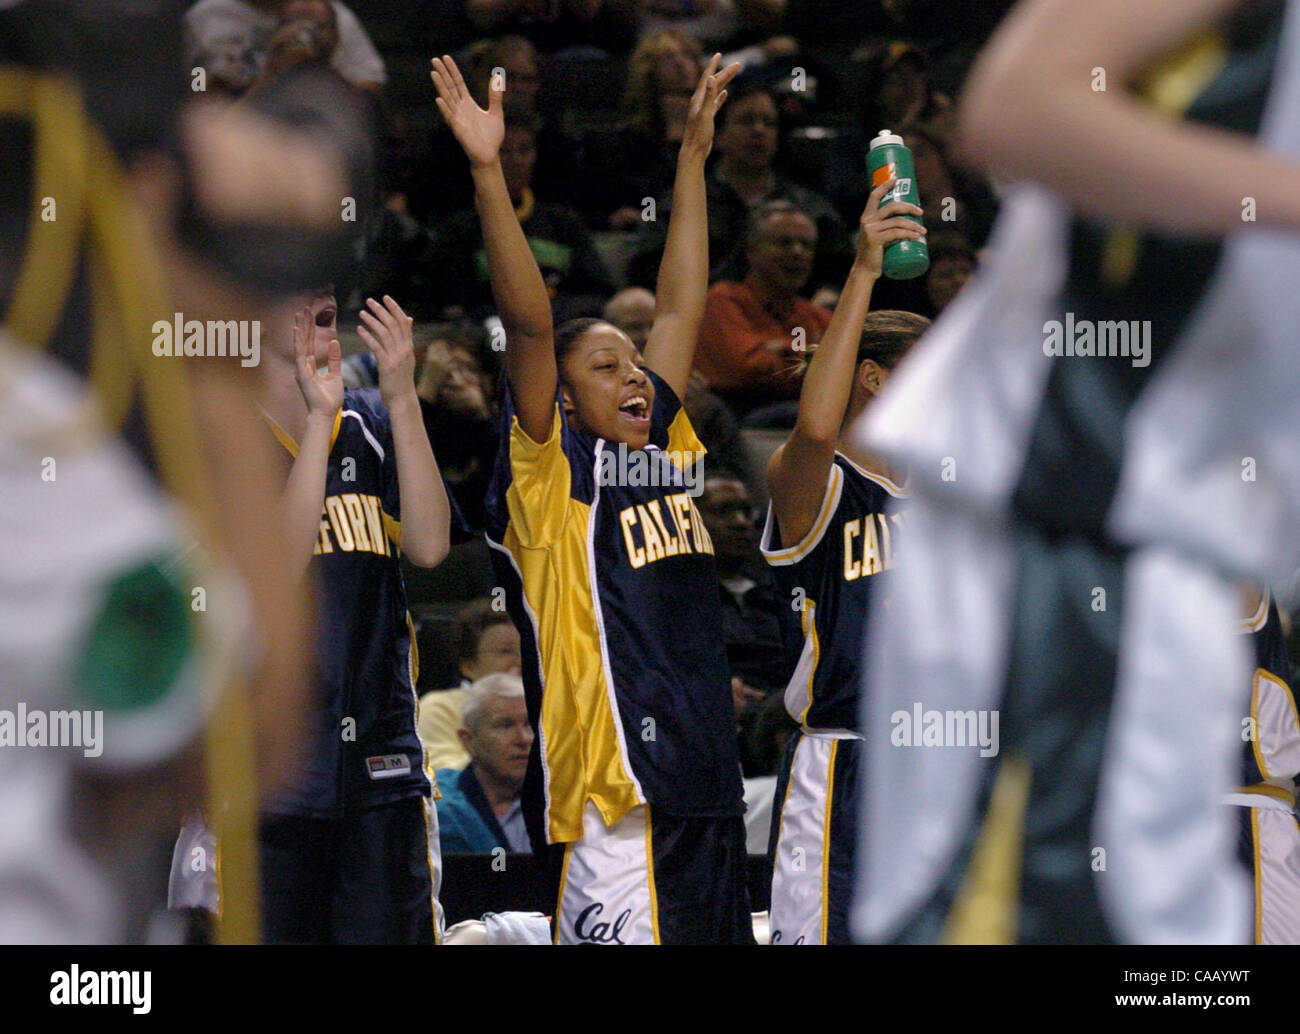 Cal's Keanna Levy (cq, center) celebrates a Cal 3-point basket in the second half of their opening game of the 2004 PAC 10 tournament played at the HP Pavilion in San Jose, Calif. on Friday, March 5, 2004. Cal beat Oregon 82-57 and will play Stanford in the next round. (Contra Costa Times/Dan Honda) Stock Photo